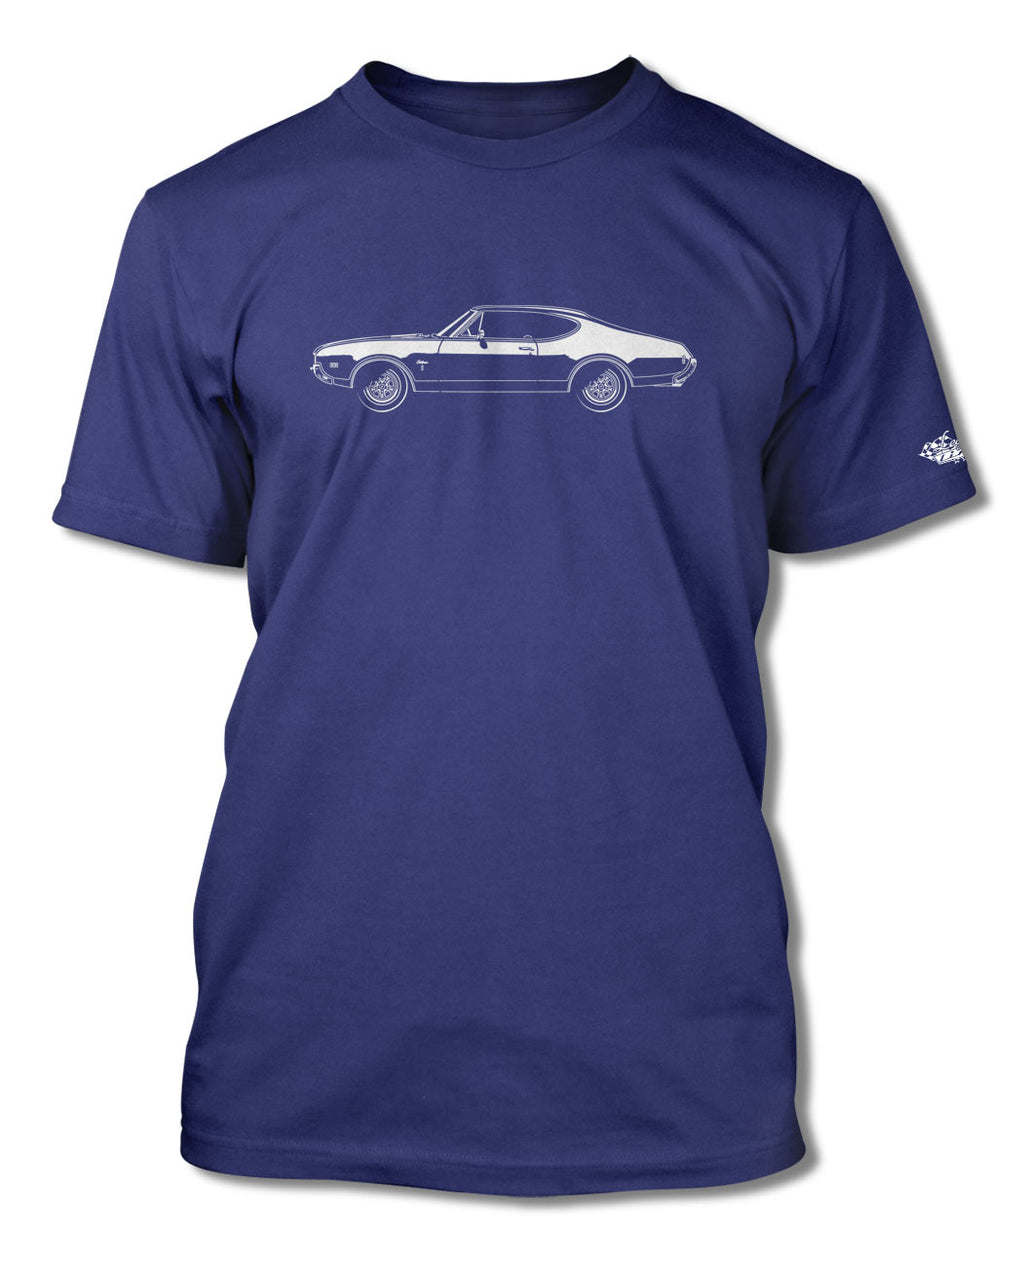 1968 Oldsmobile Cutlass S Holiday Coupe T-Shirt - Men - Side View